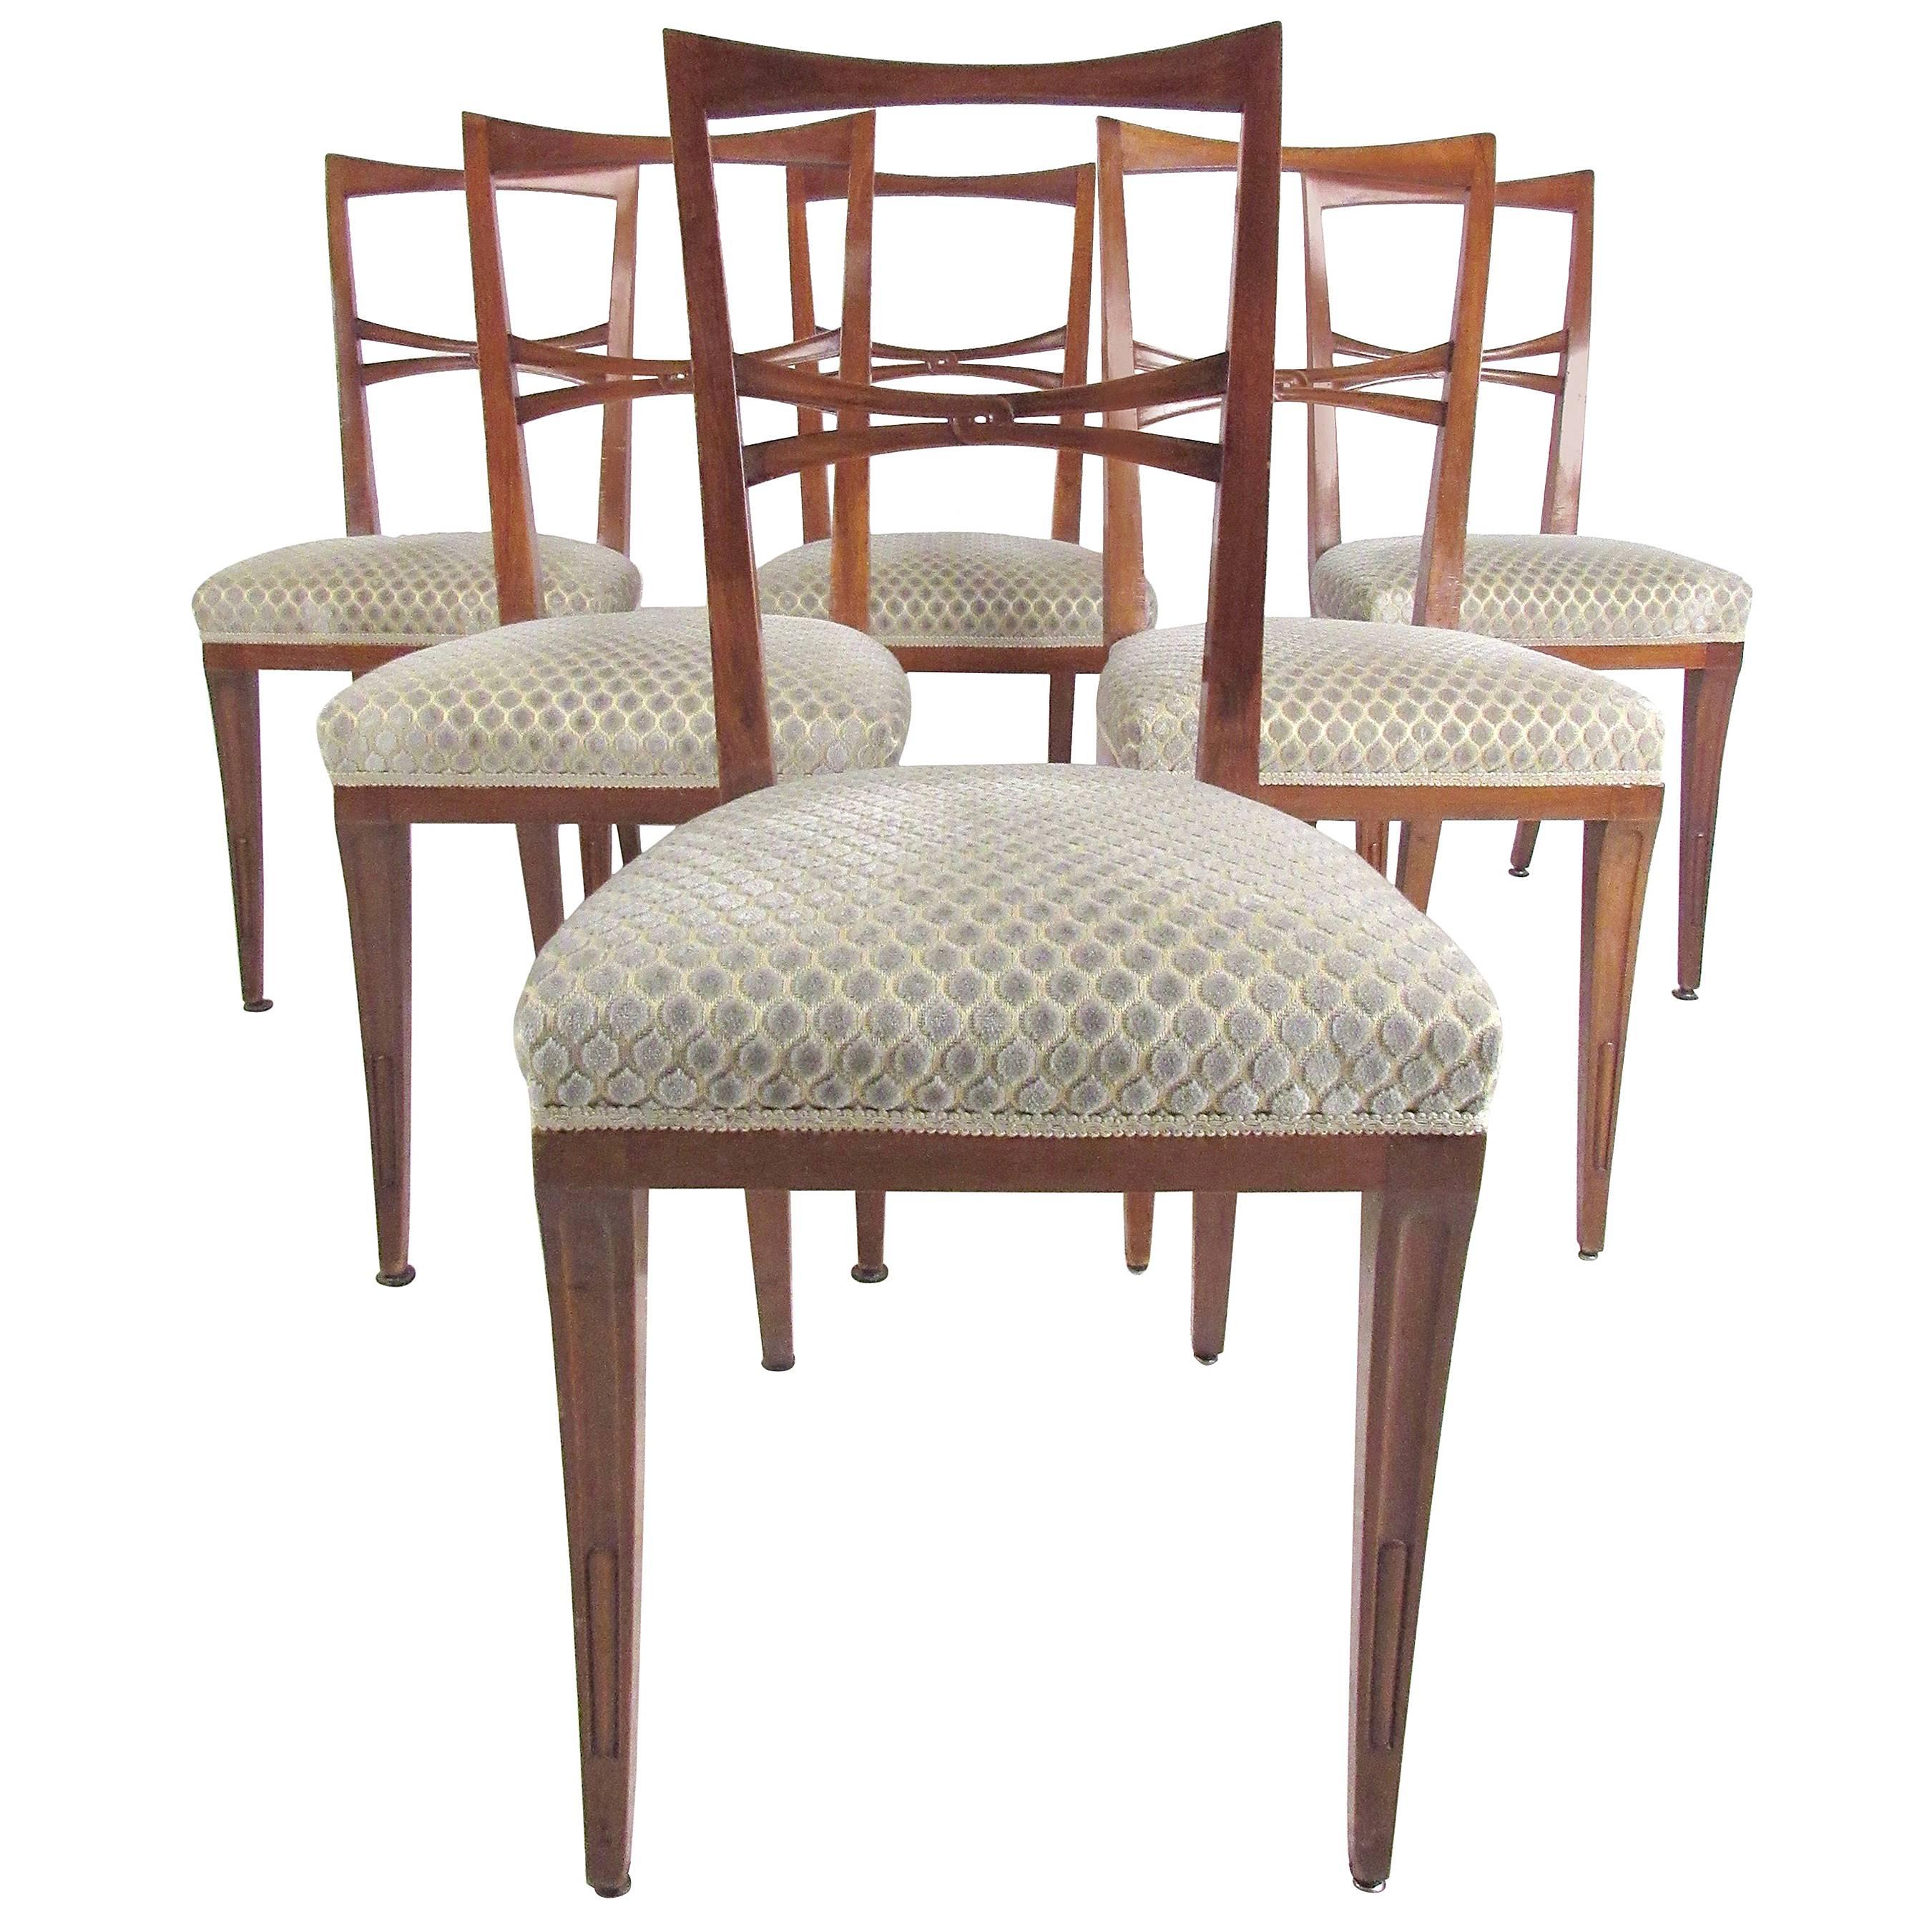 Italian Modern Dining Chairs after Gio Ponti